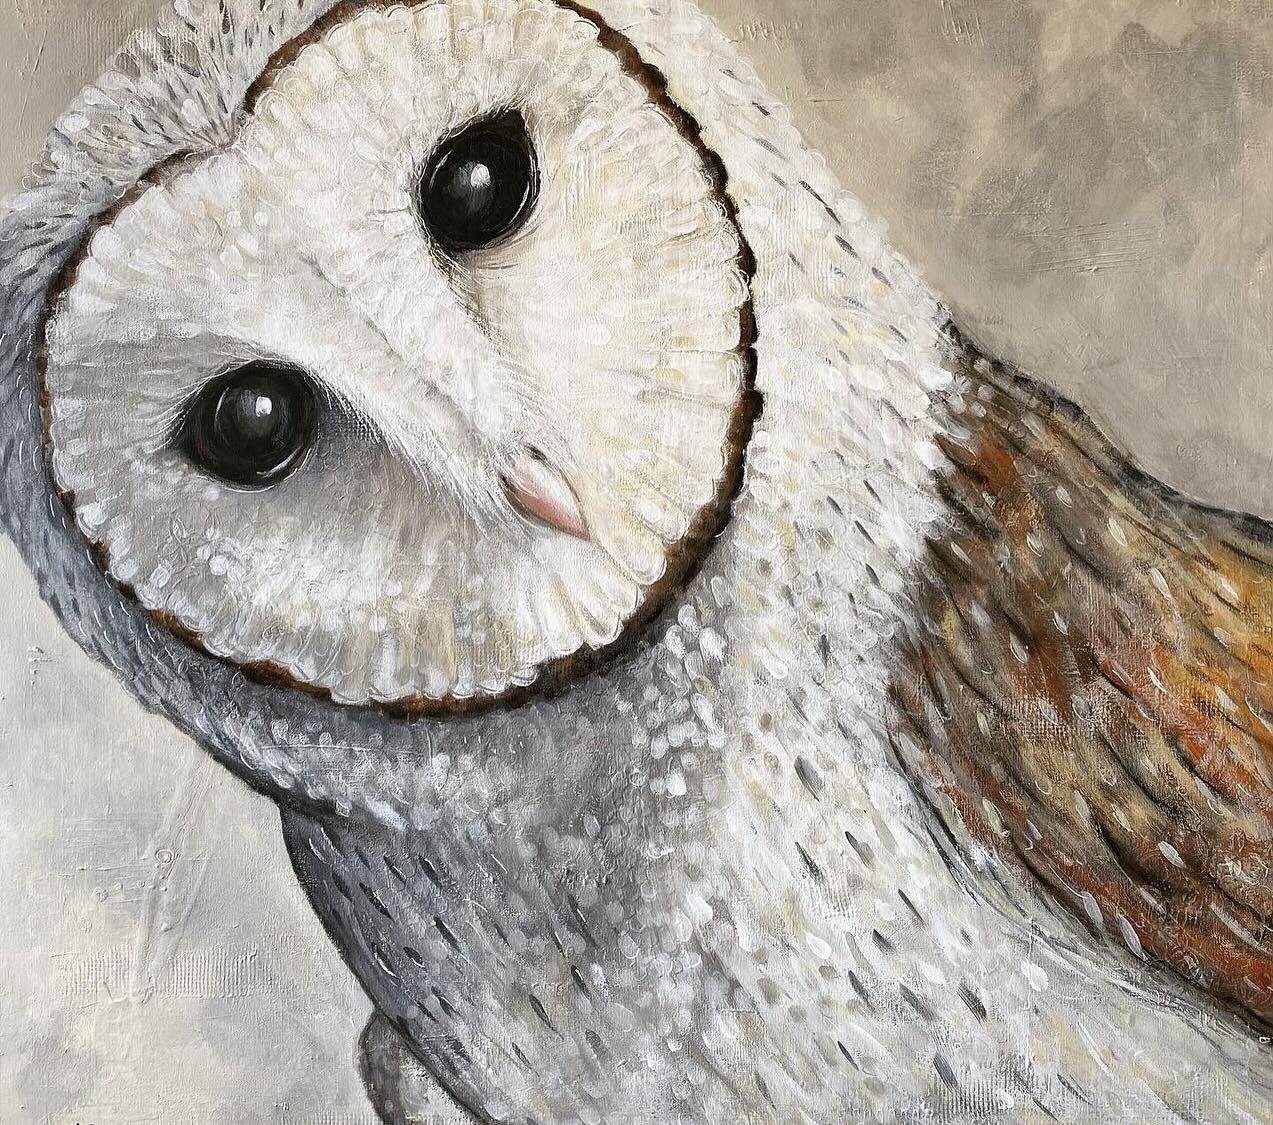 Have you seen my owl painting in the shop window at Make It Tenterfield? 
&lsquo;See Me&rsquo;  90 x 90cm  Acrylic on canvas. Now available for purchase. Drop into Make It and check it out in person. #tenterfieldshowwinner #figurativewinner